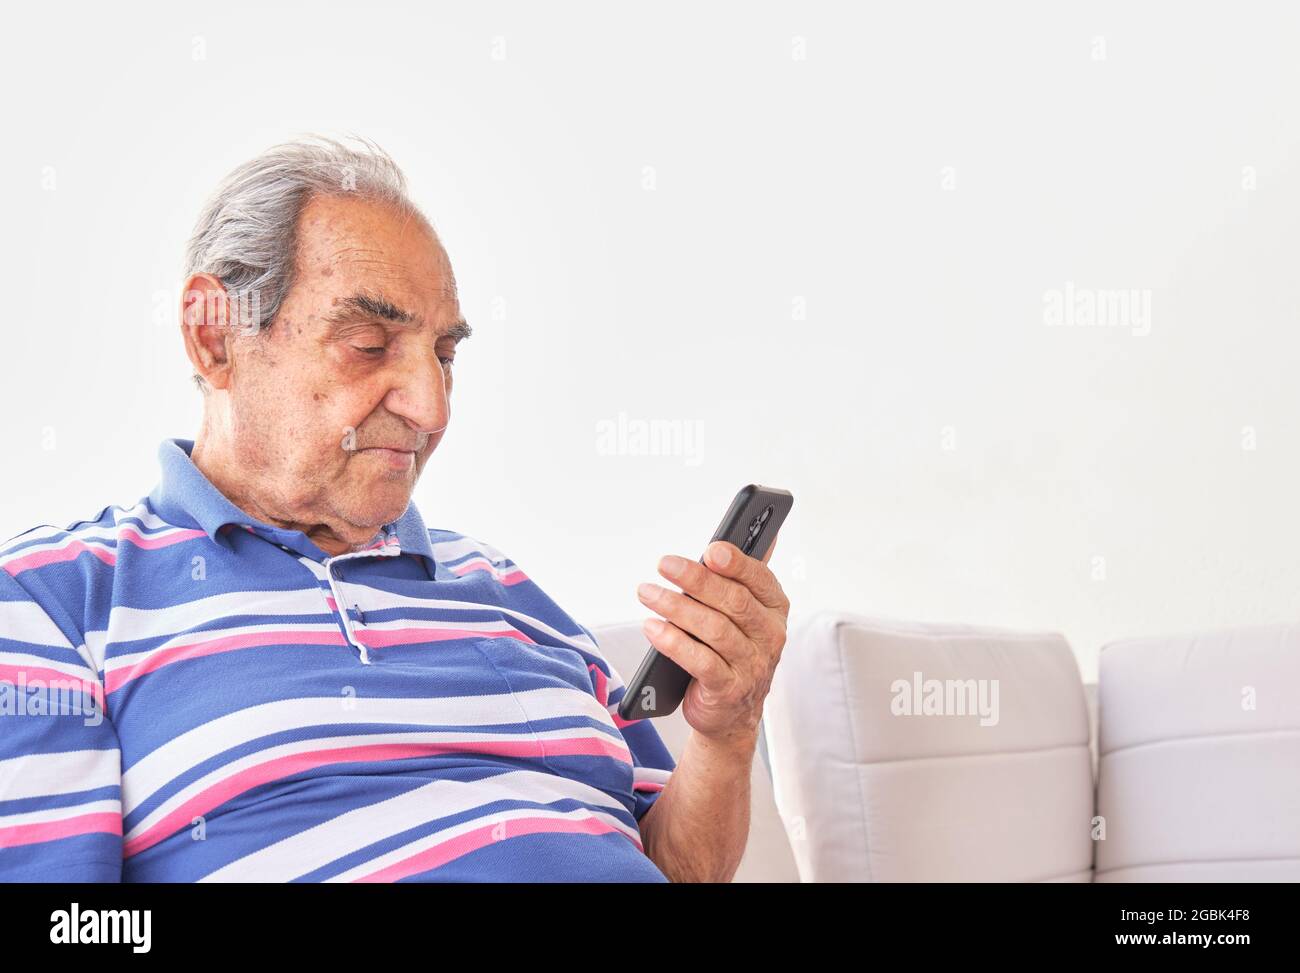 older dark-haired man with gray hair in striped shirt sitting holding a smartphone with light background Stock Photo